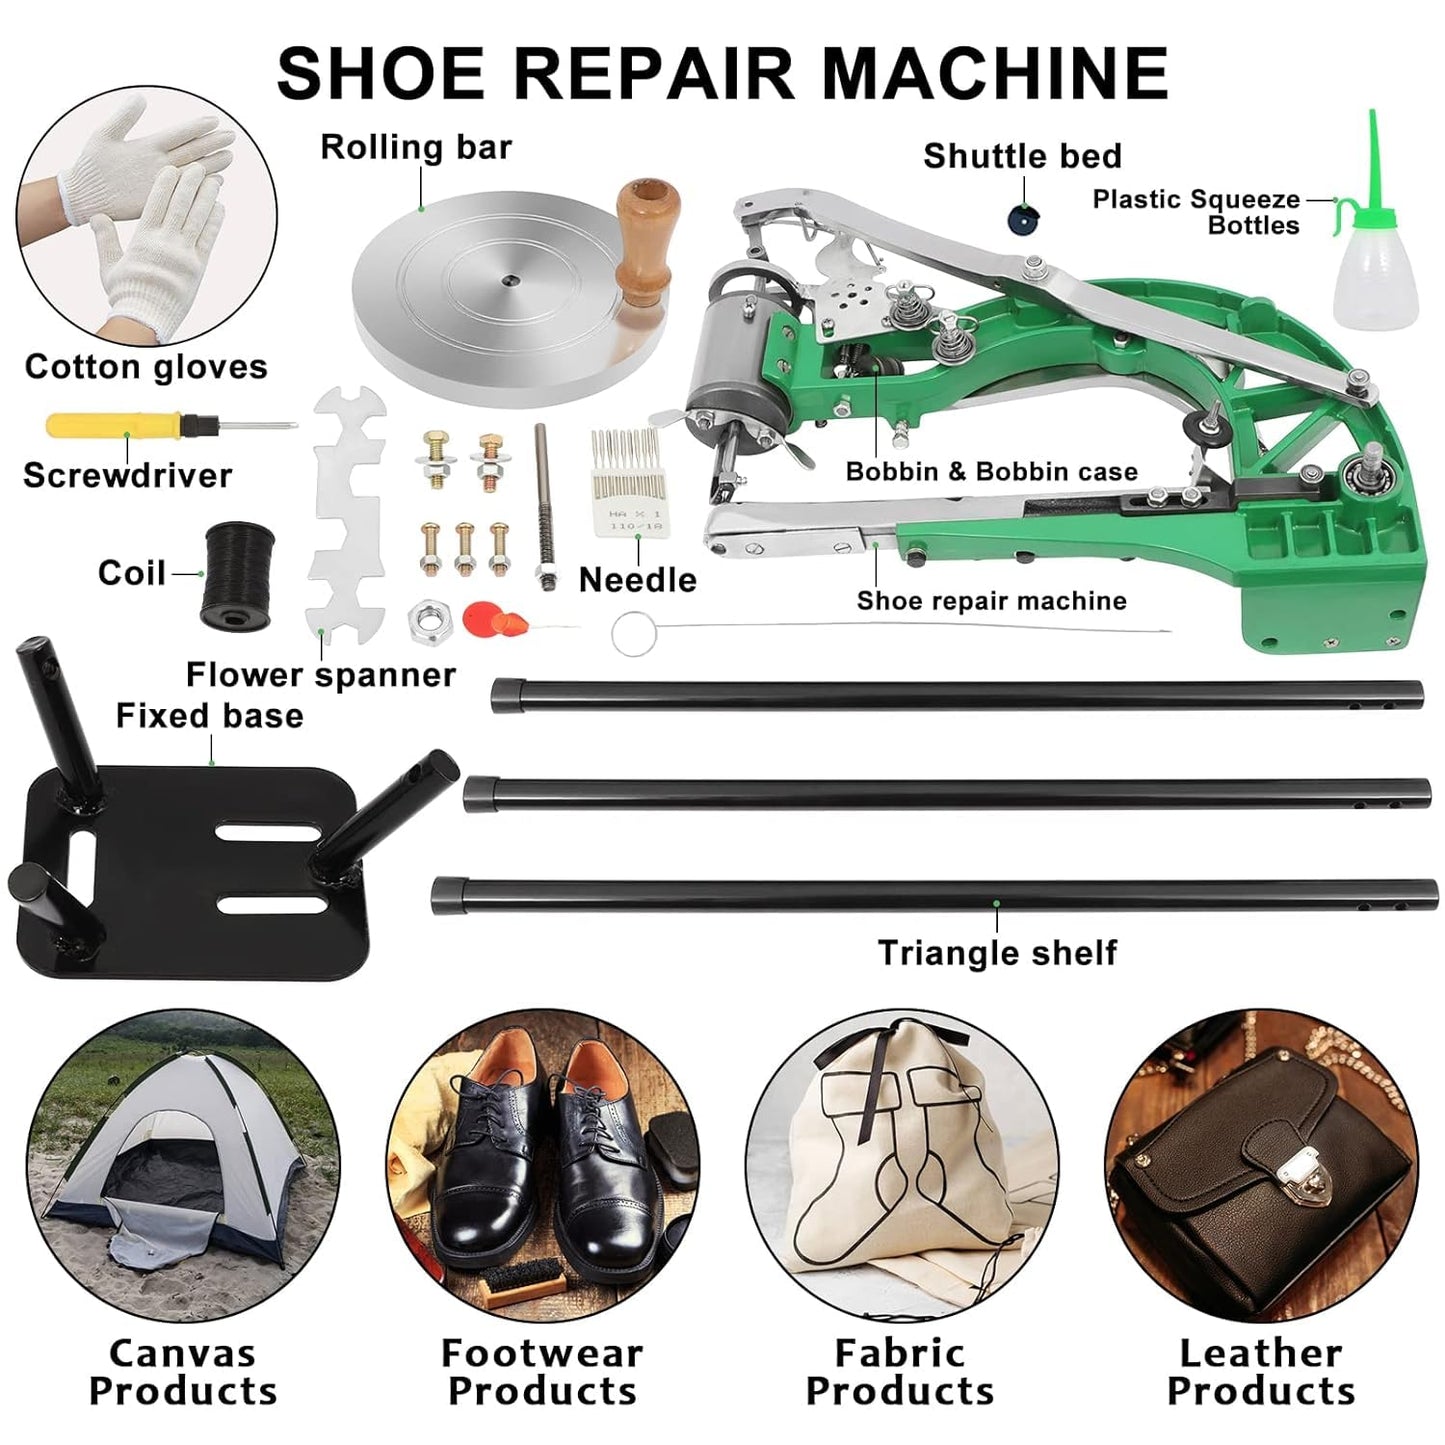 FAHKNS Leather Sewing Machine Handheld Shoe Repair Heavy Duty Metal Manual Cobbler Stitching Mending with Dual Cotton Nylon Line Canvas for Bags Tents Clothes Quilts Coats Trousers Belt DIY